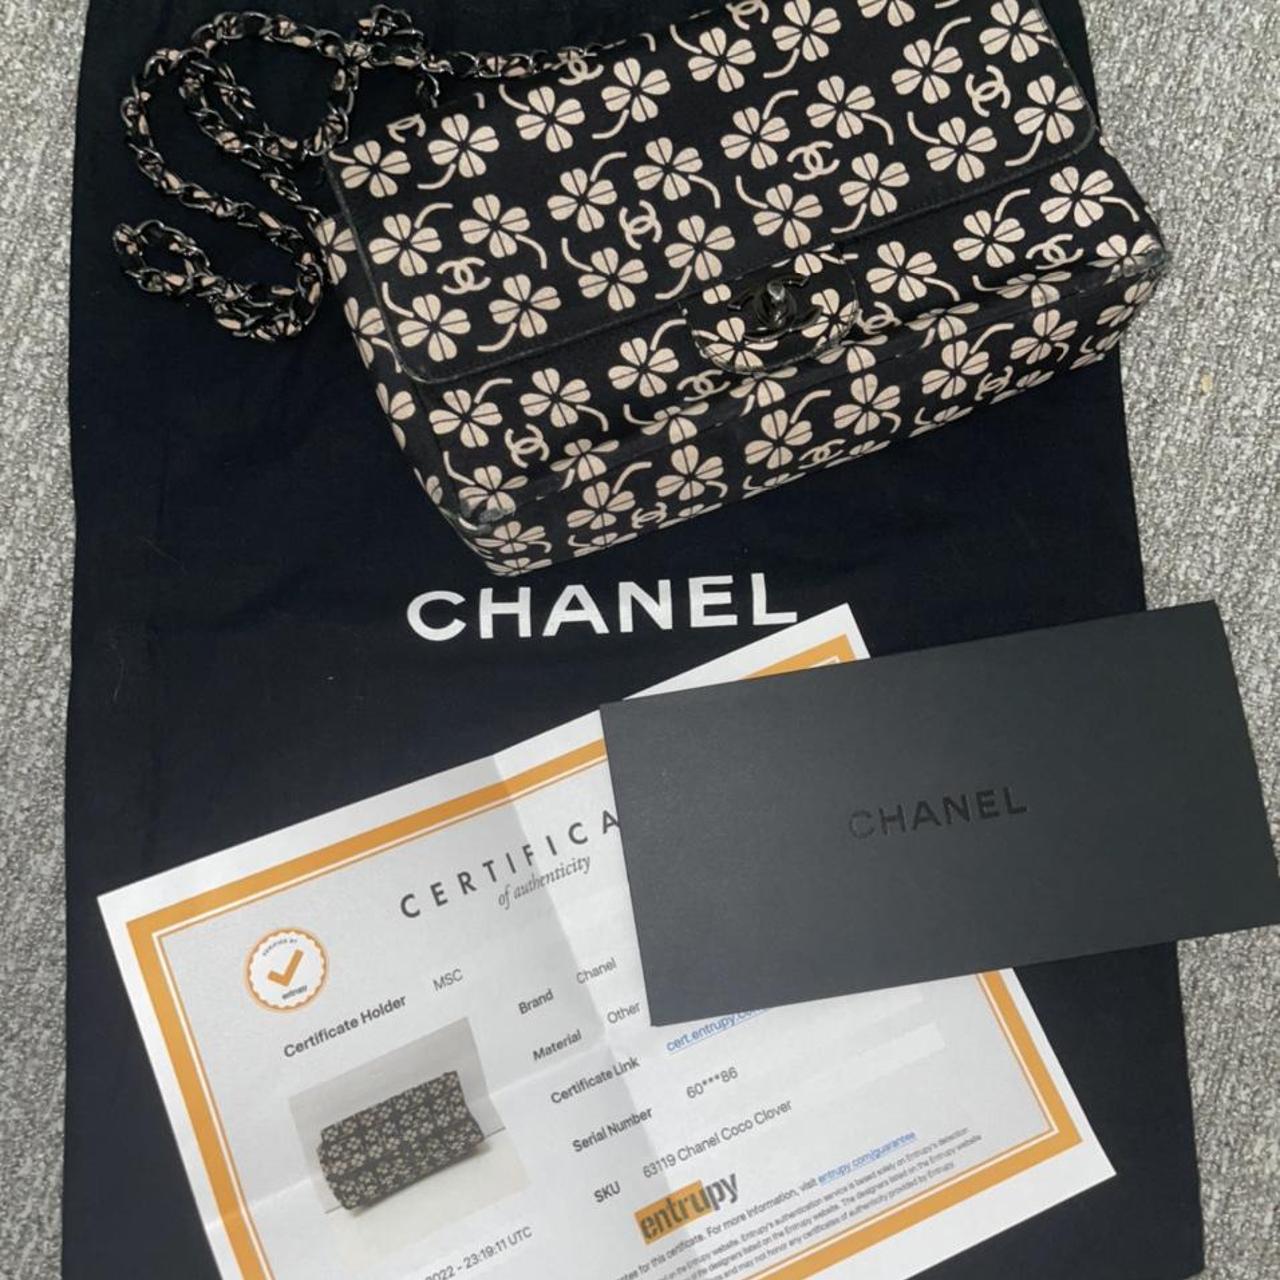 CHANEL Bag Vintage Navy Blue with authentic certificate card